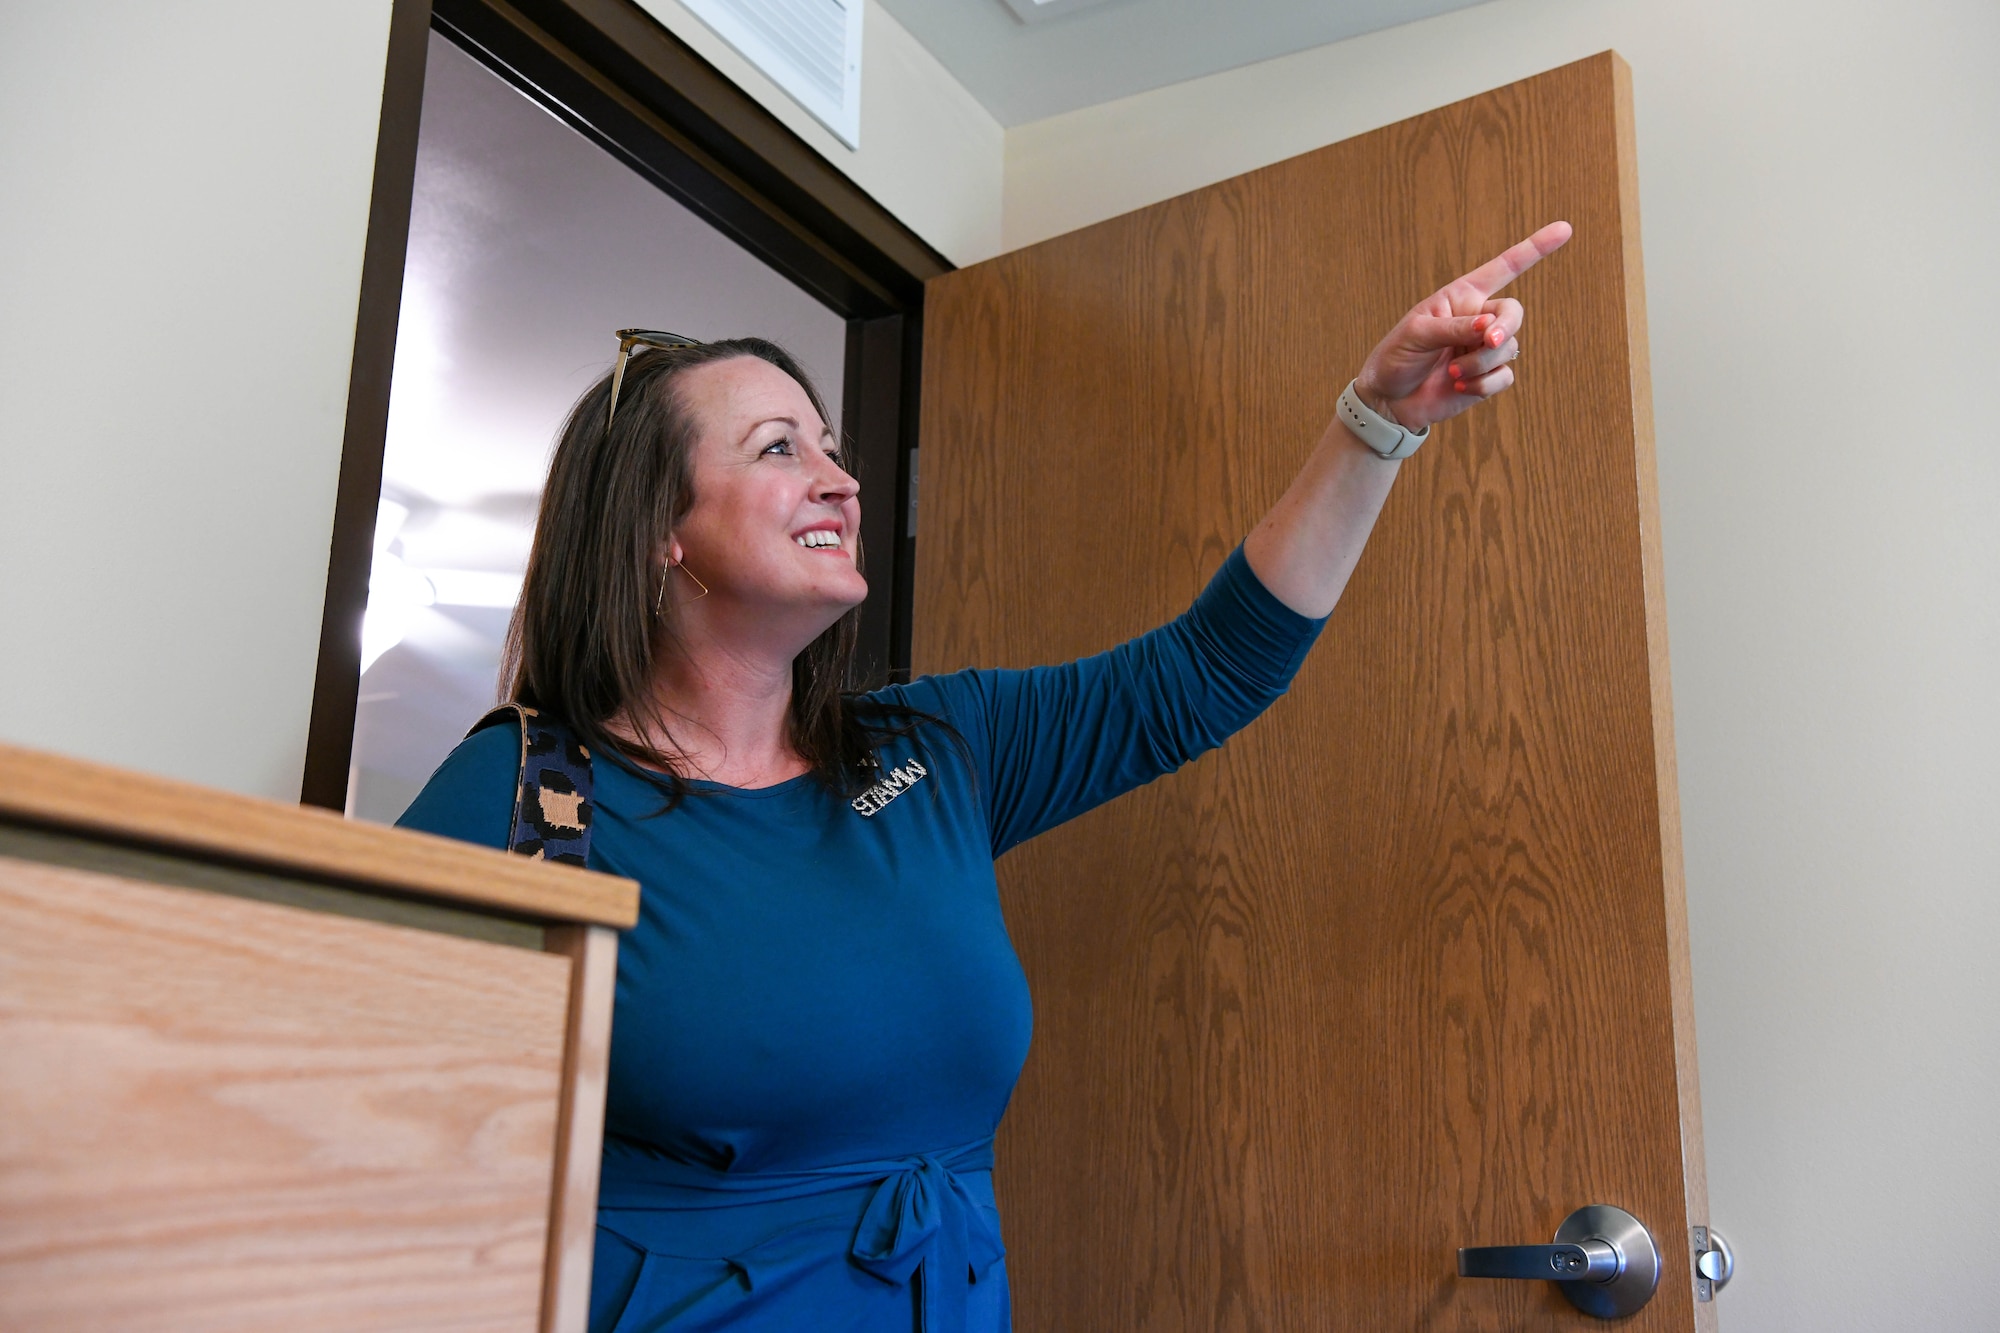 Jennifer Baker, 97th Air Mobility Wing key spouse, admires one of the bedrooms in the new dormitory at Altus Air Force Base, Oklahoma, June 13, 2022. Each individual room in the dormitory features a walk-in closet and bathroom. (U.S. Air Force photo by Airman 1st Class Trenton Jancze)